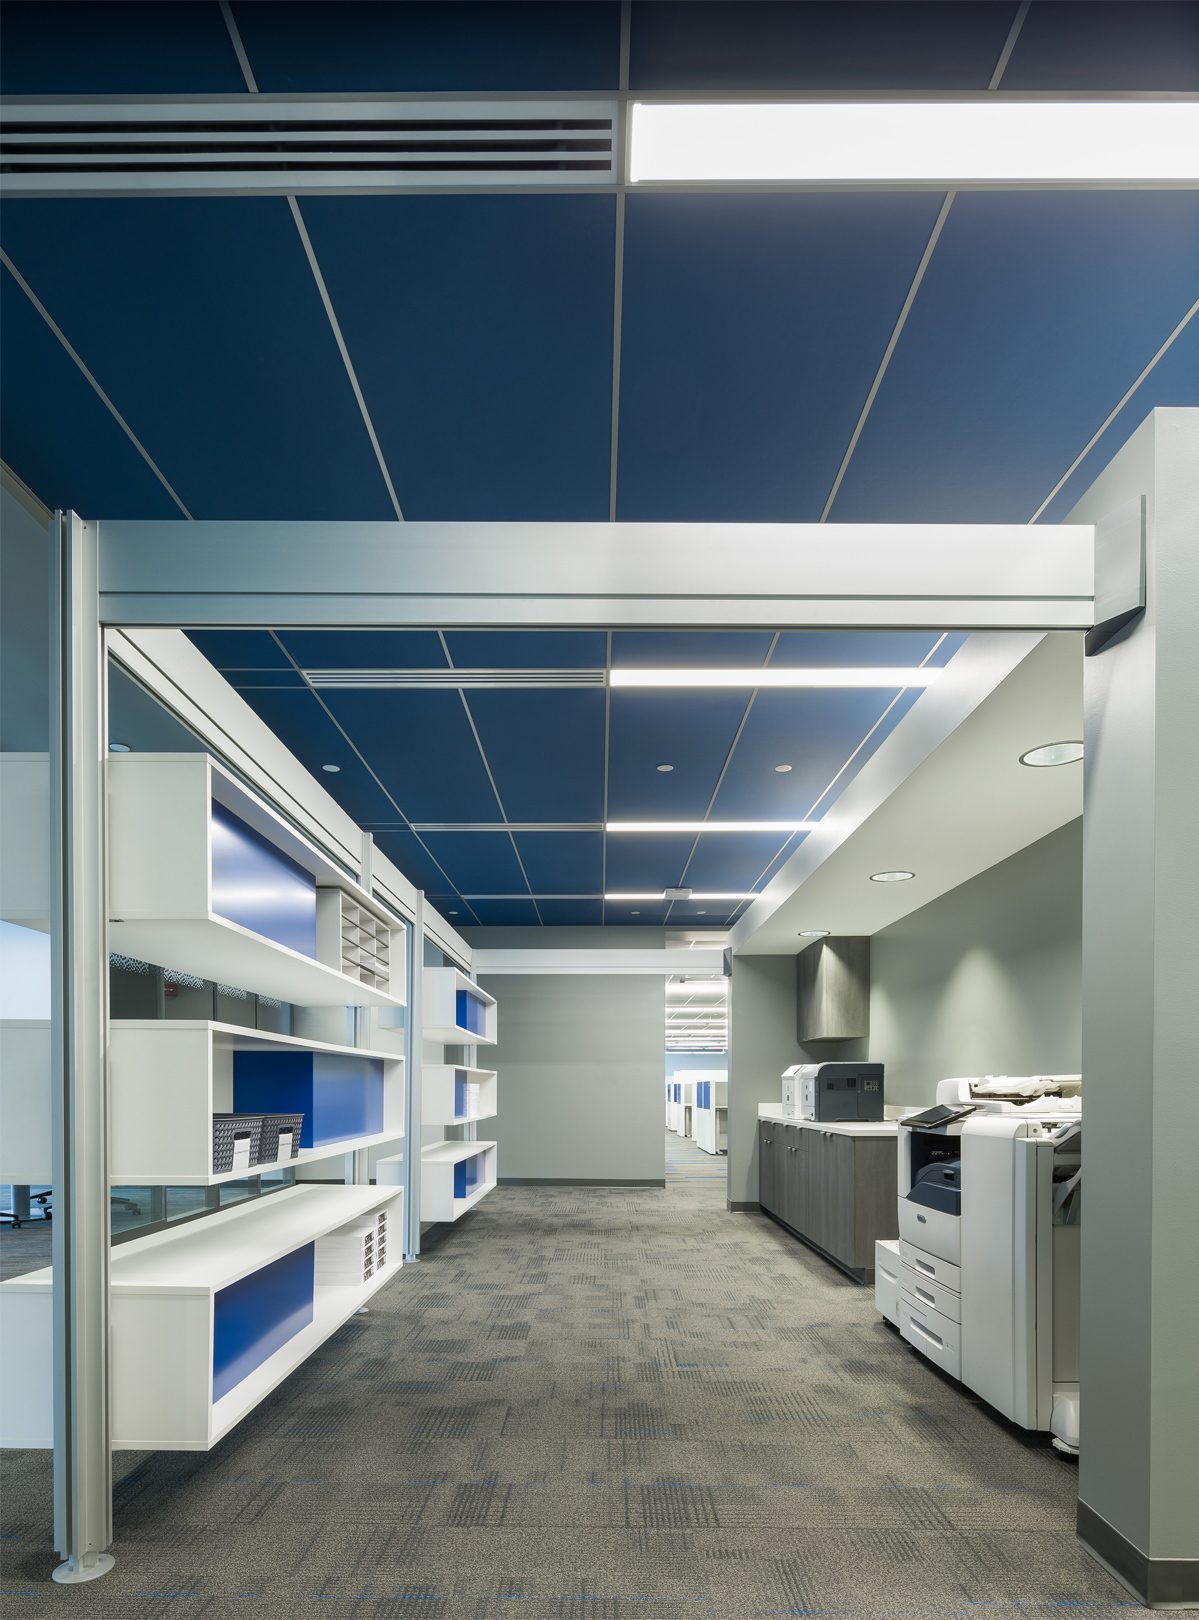 Organized office printing area with blue ceiling tile system.